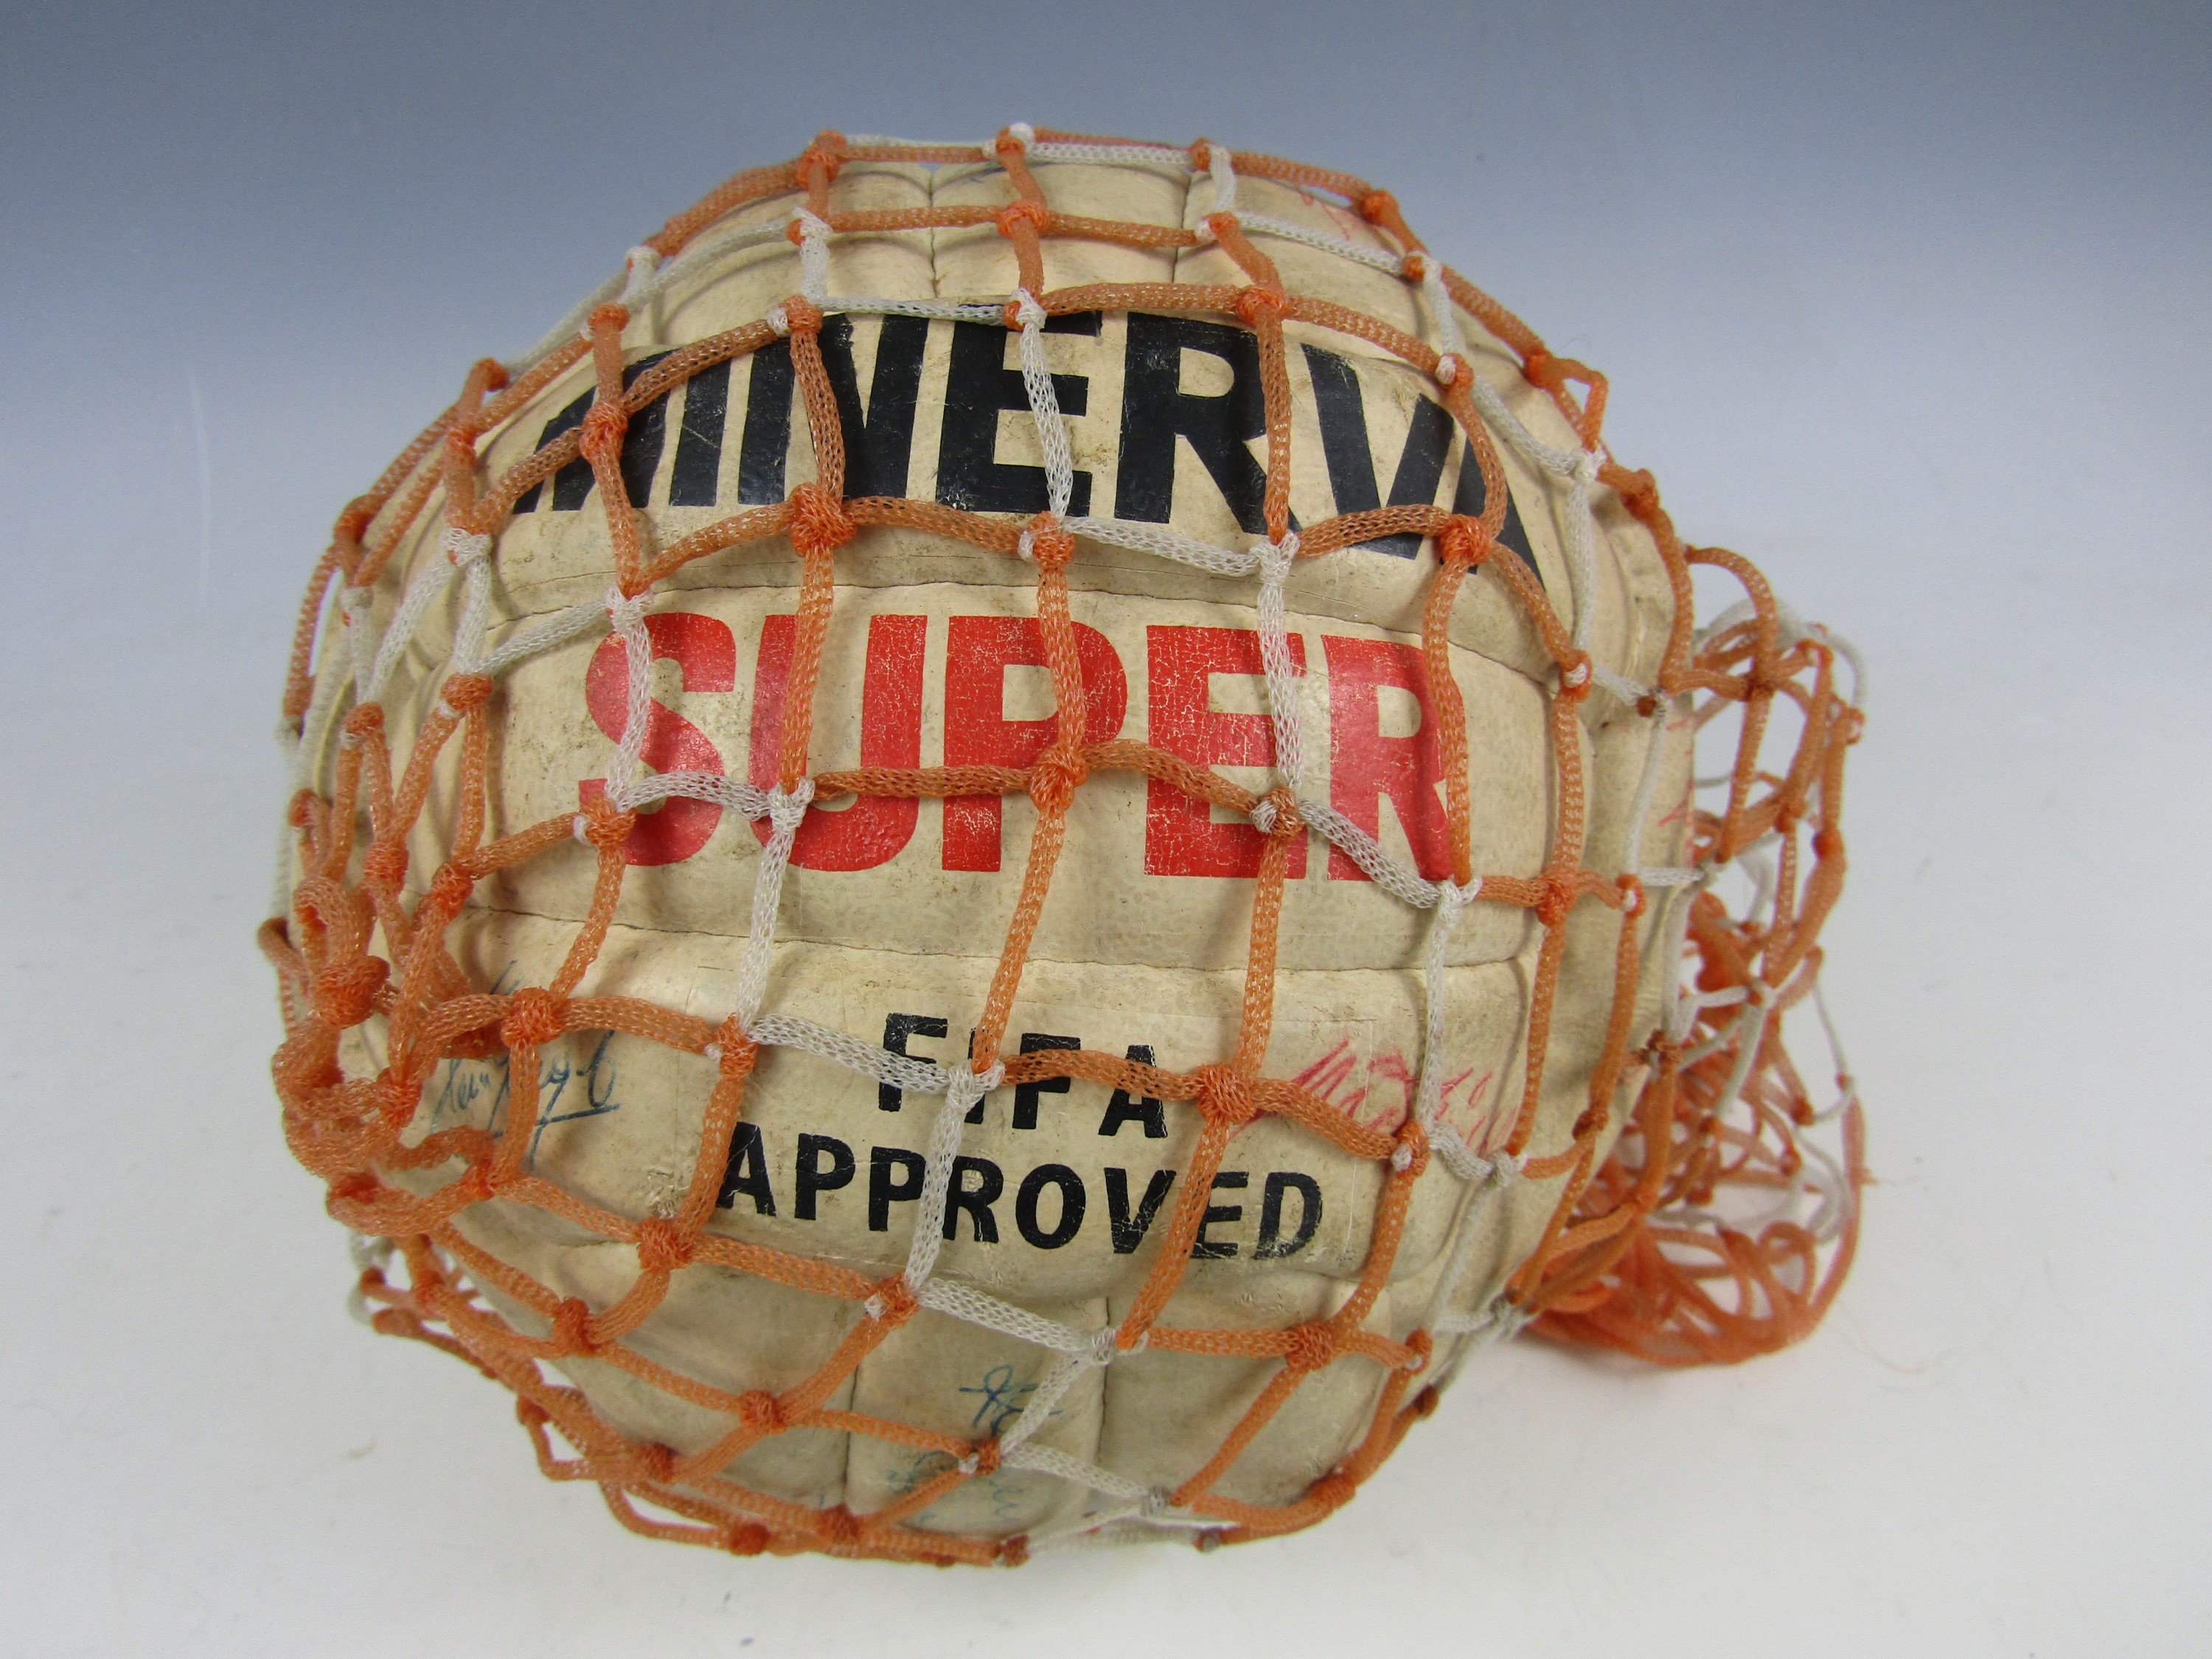 [Autographs] A white Minerva Super leather football signed by the England national football squad,